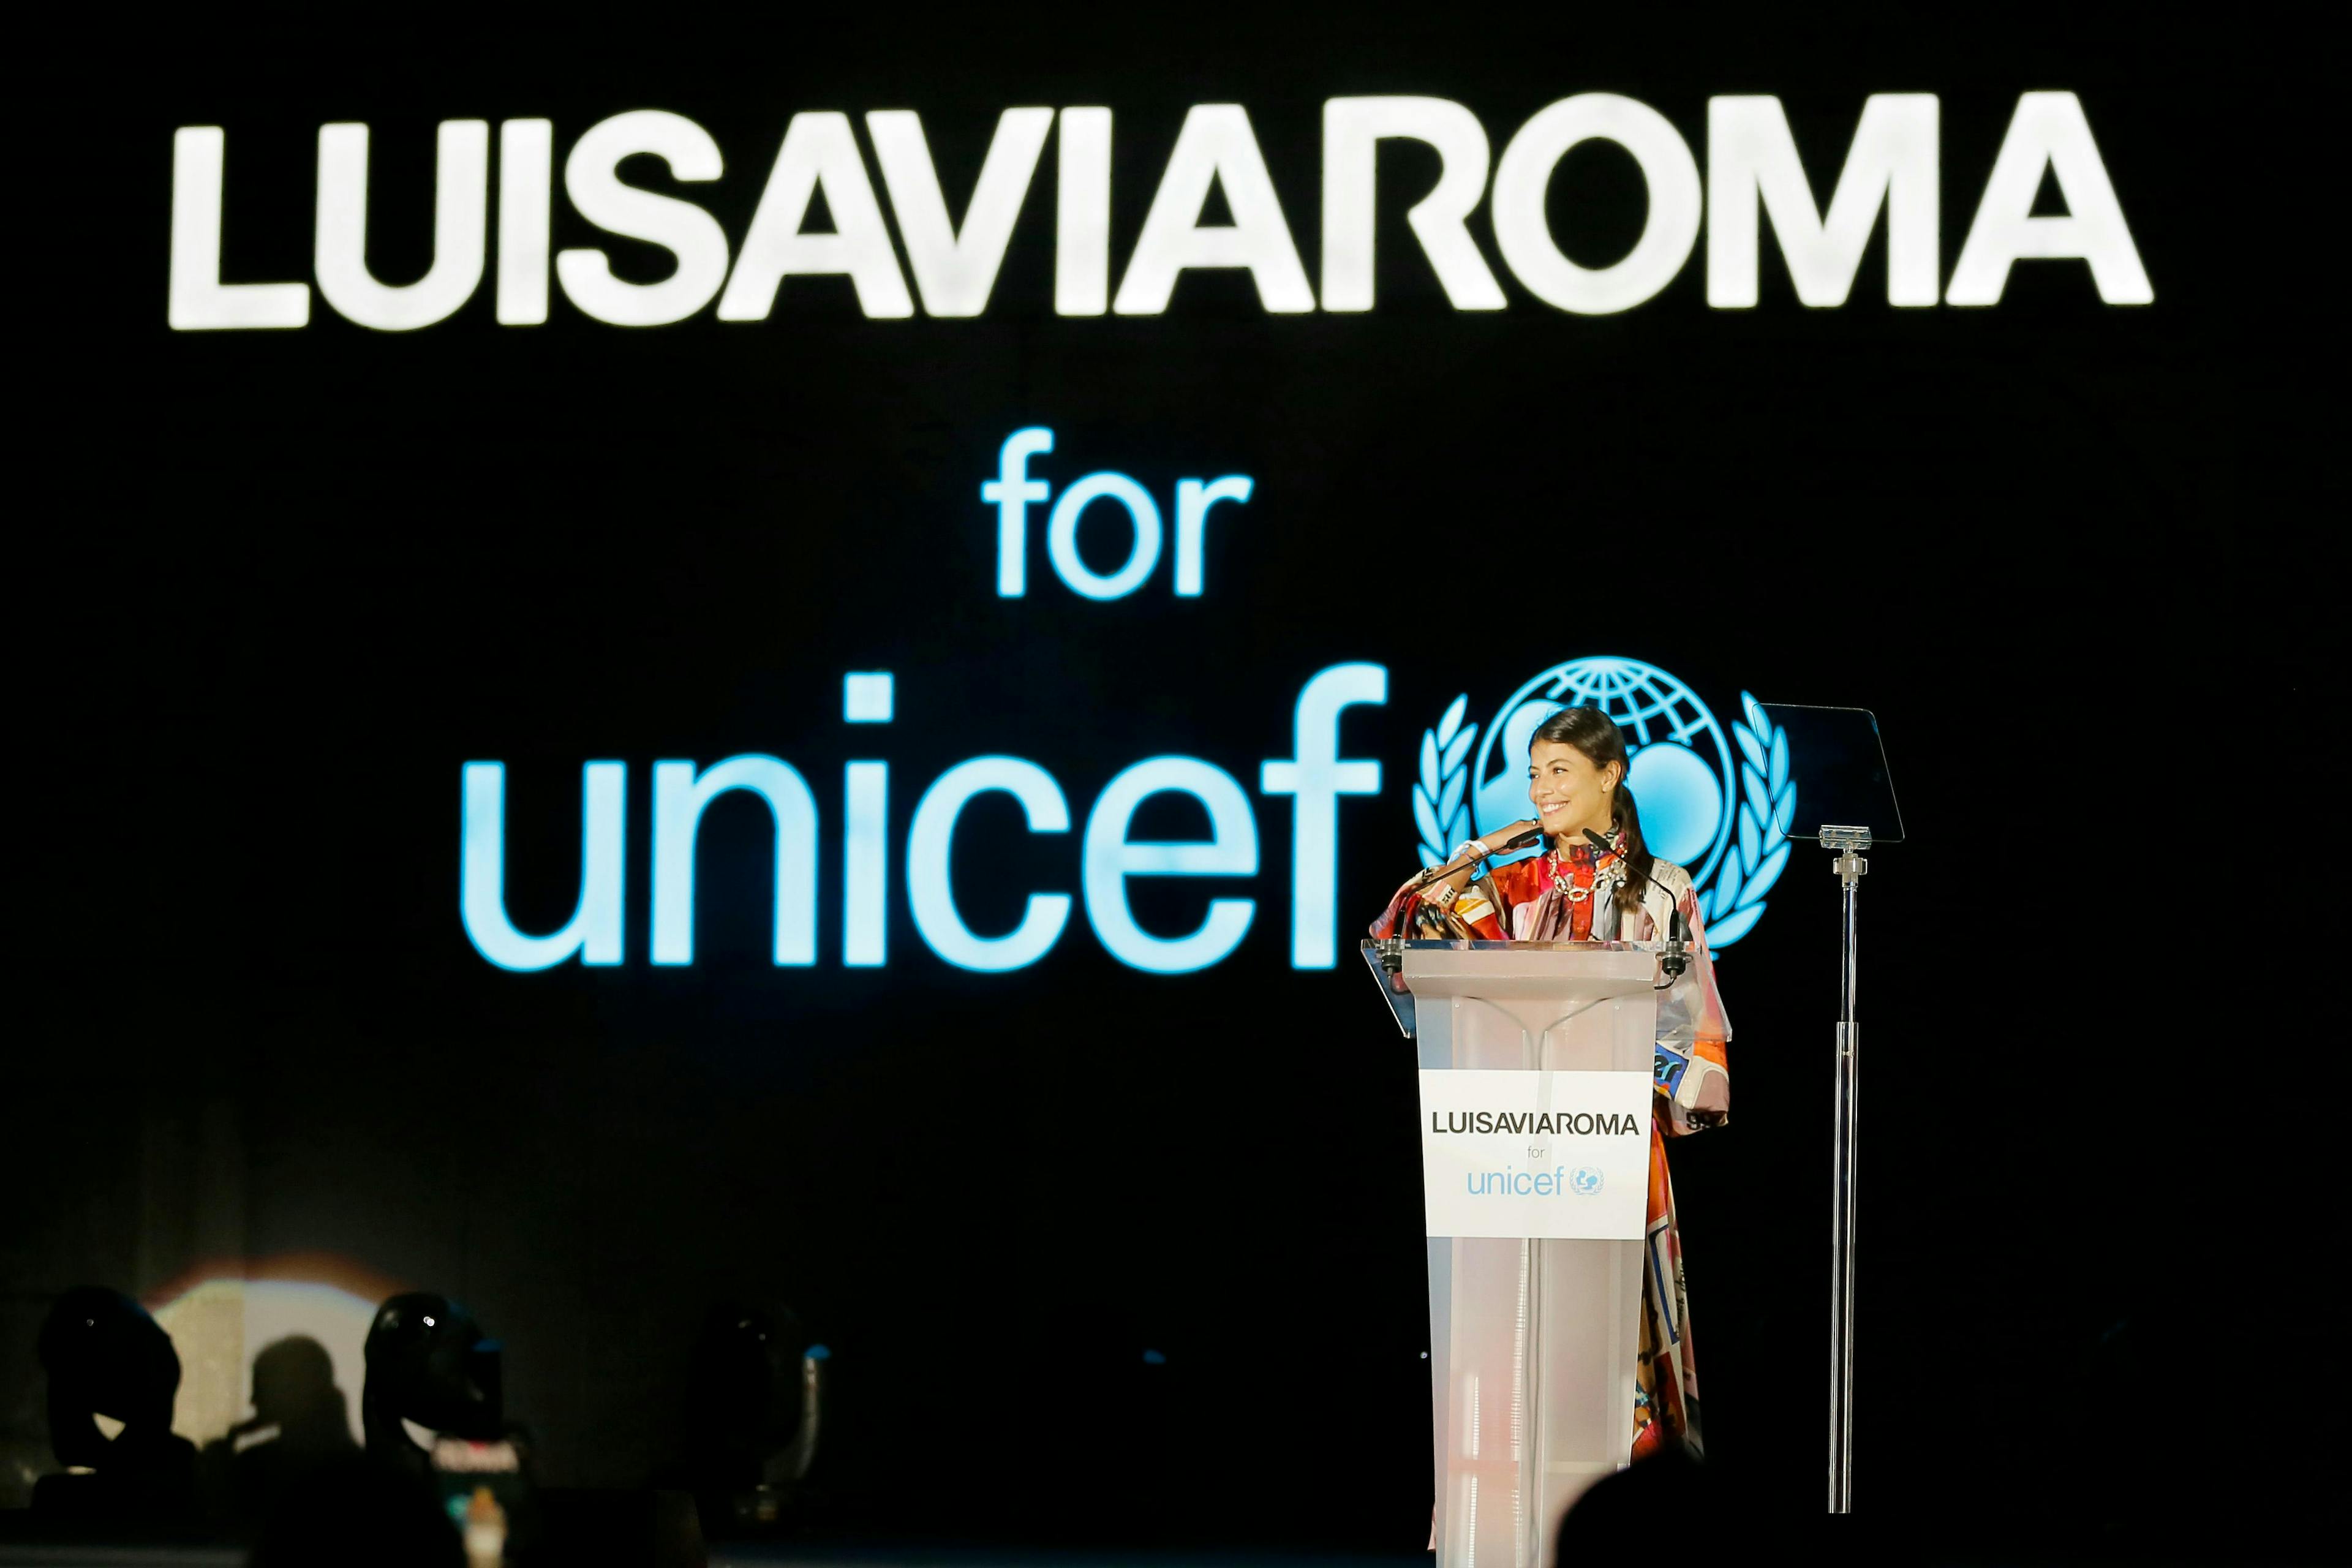 arts culture and entertainment celebrities fashion luisaviaroma dinner event unicef party - social event capri human audience person crowd speech